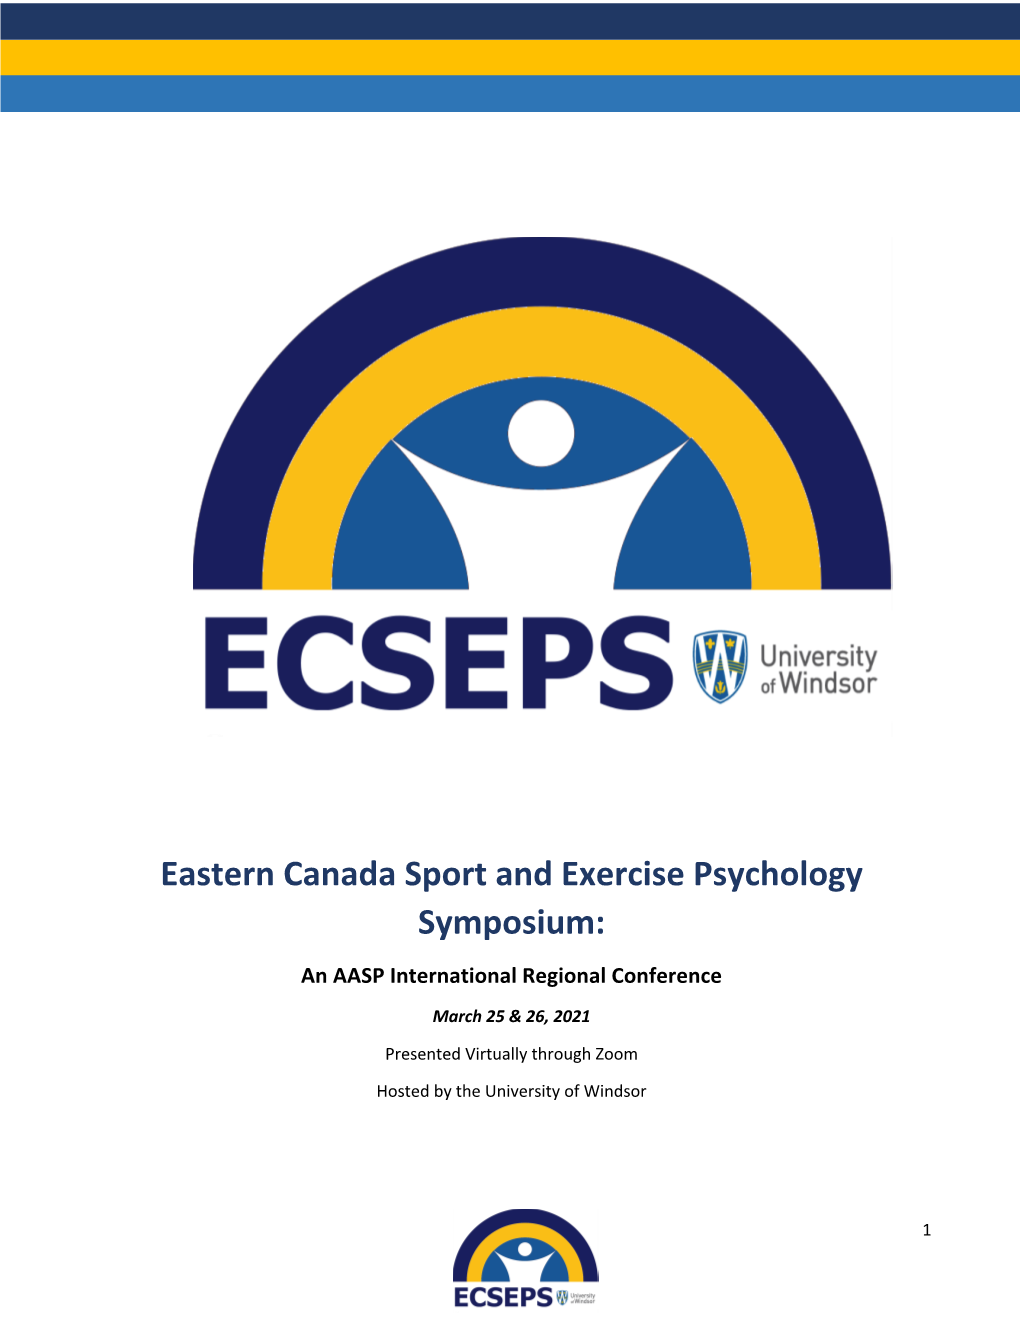 Eastern Canada Sport and Exercise Psychology Symposium: an AASP International Regional Conference